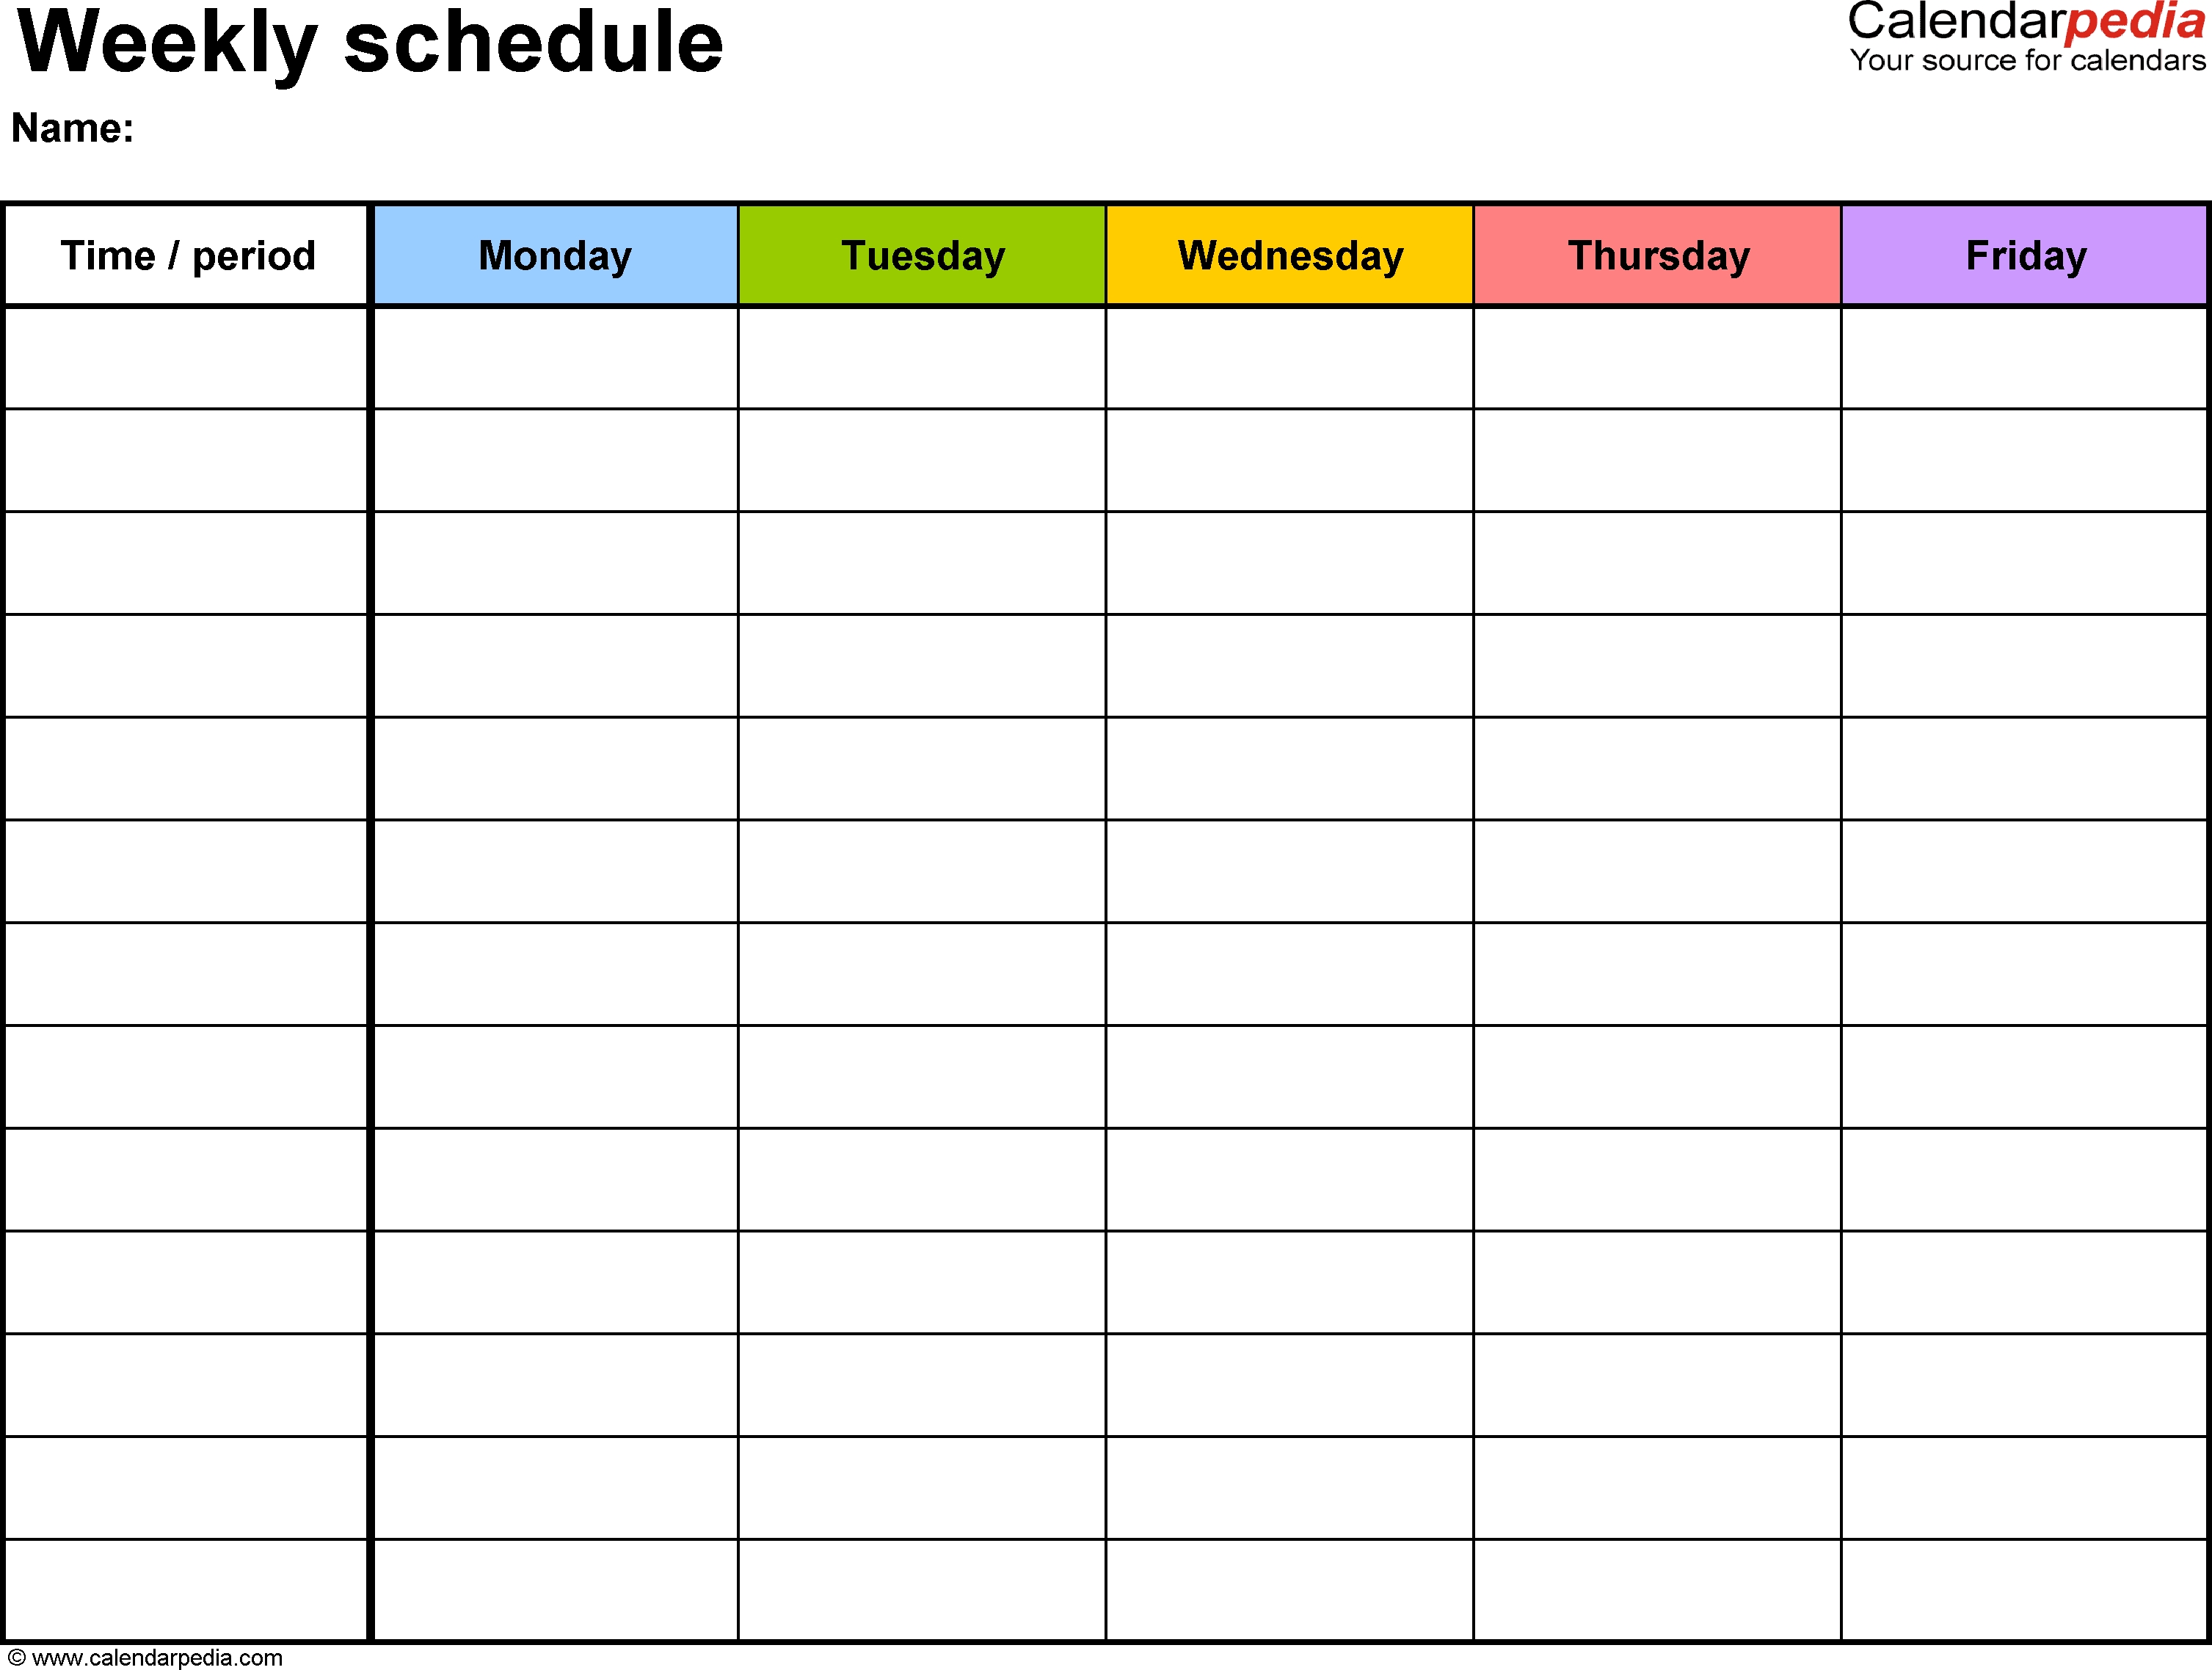 Weekly Schedule Template For Word Version 1: Landscape, 1-Monday To Friday Calendar Template